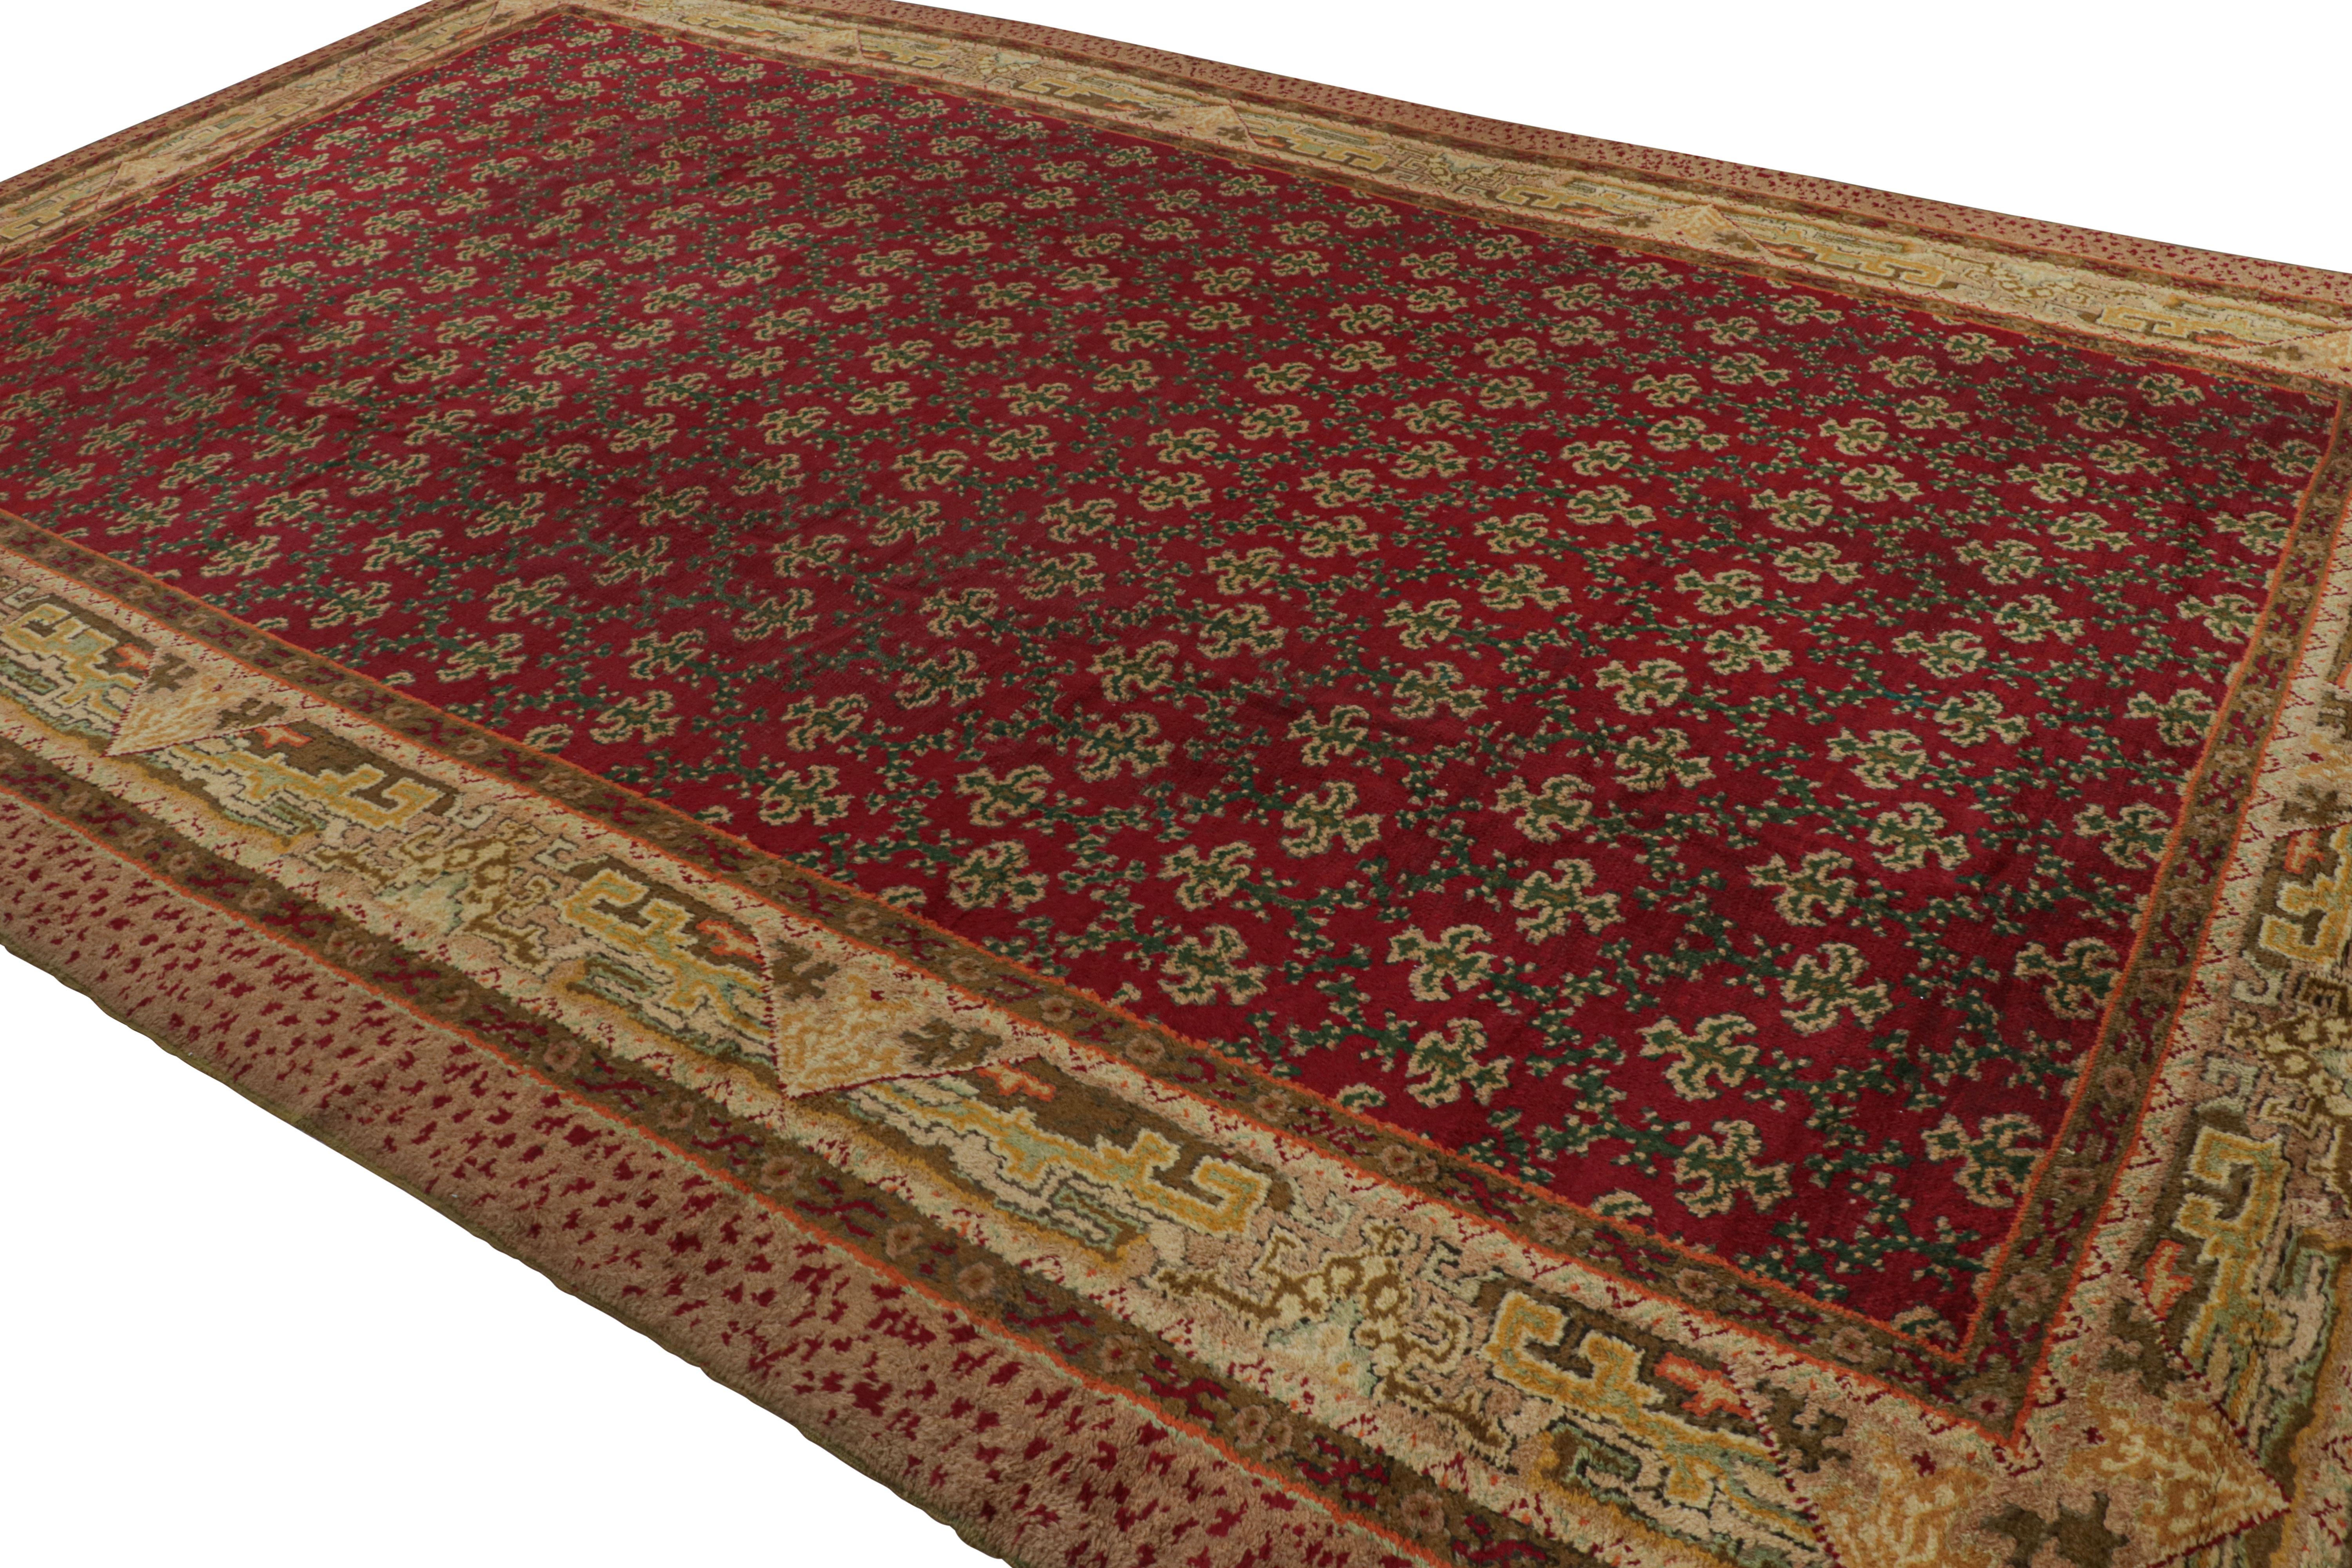 Hand-knotted in wool, an antique 11x17 Antique Axminster rug circa 1920-1930 latest to our antique collection.

On the Design:


Here, rich red underscores green floral patterns in the field, while chartreuse and gold tones underscore “one of the